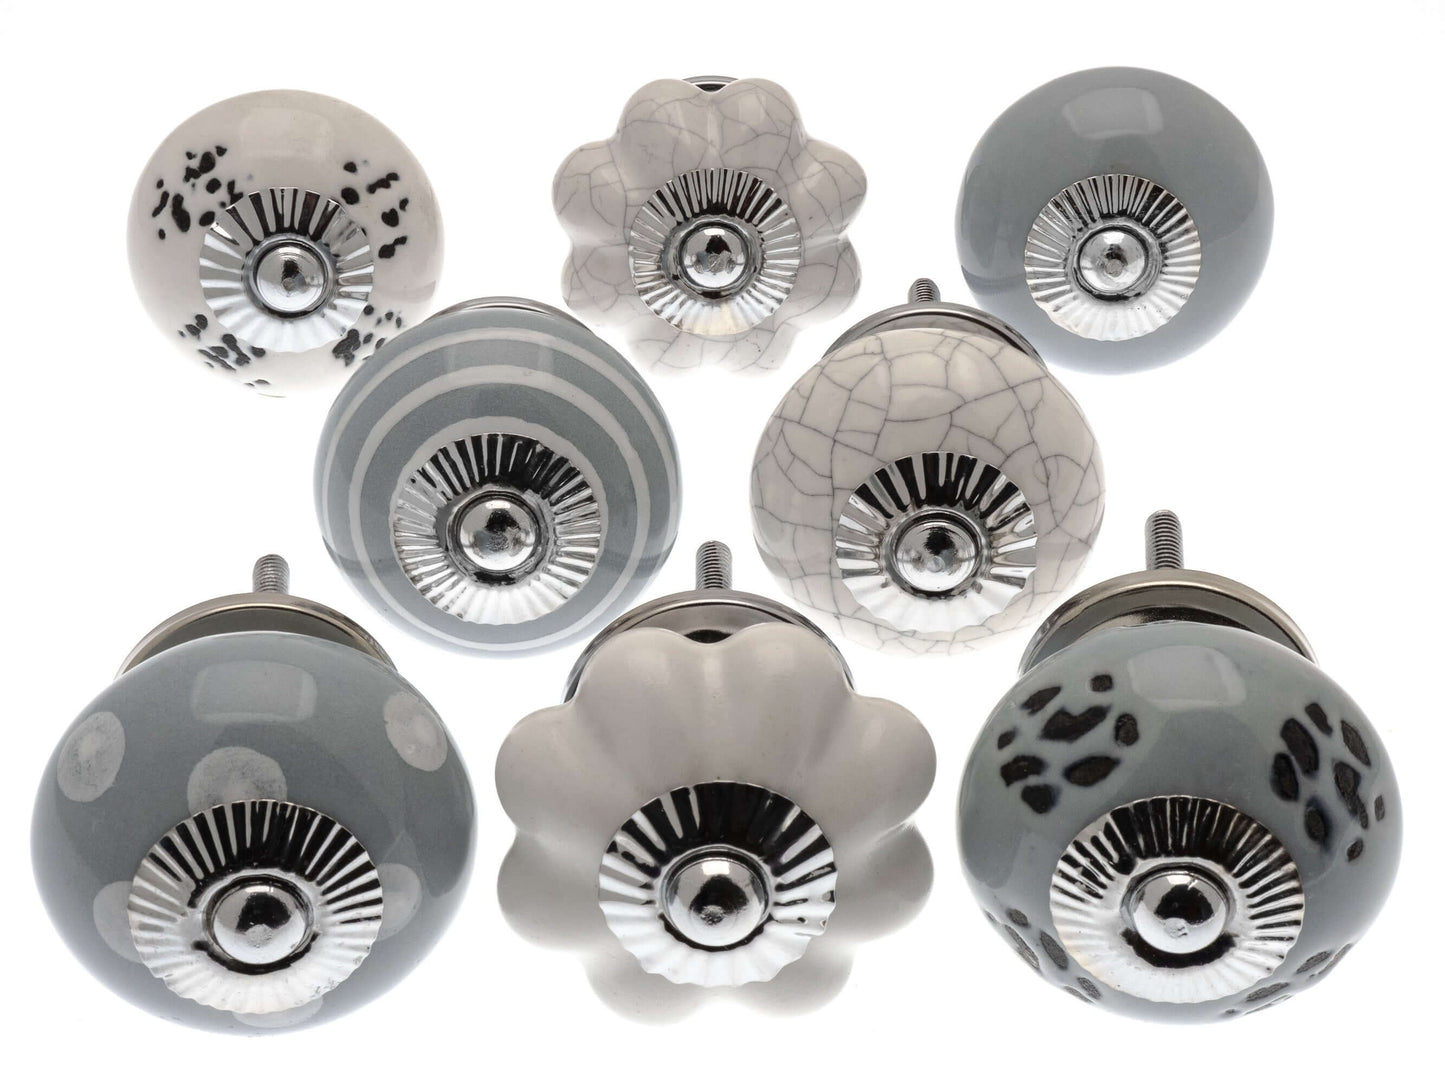 Ceramic Cupboard Knobs in 8 Pretty Shades of Grey and White